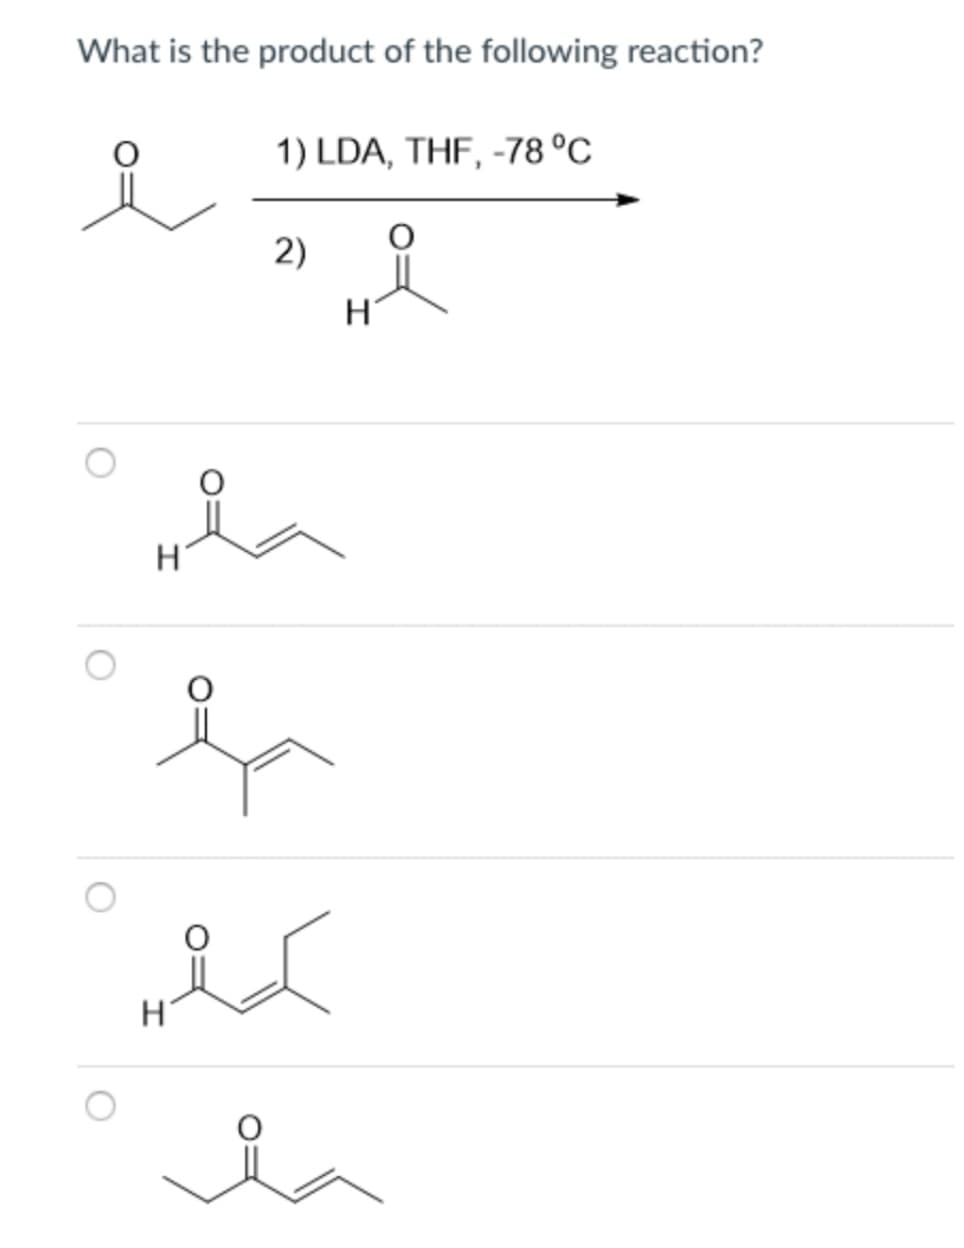 What is the product of the following reaction?
1) LDA, THF, -78 °C
2)
